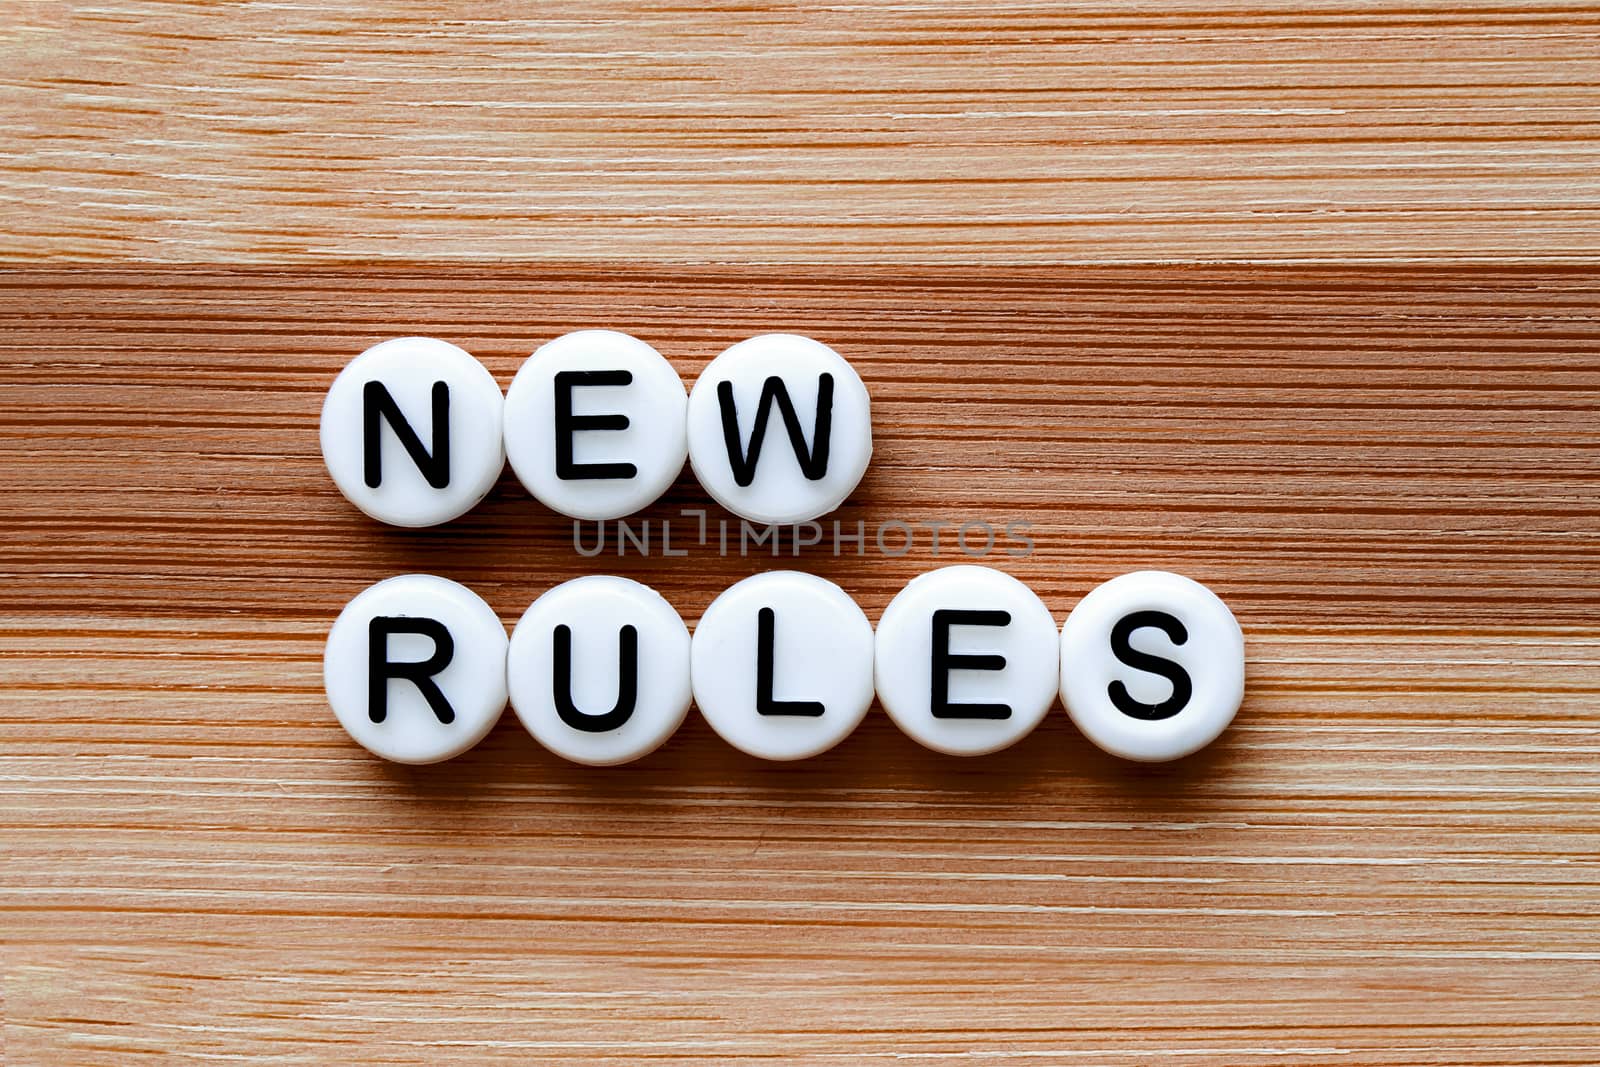 New Rules text on a wooden table by oasisamuel